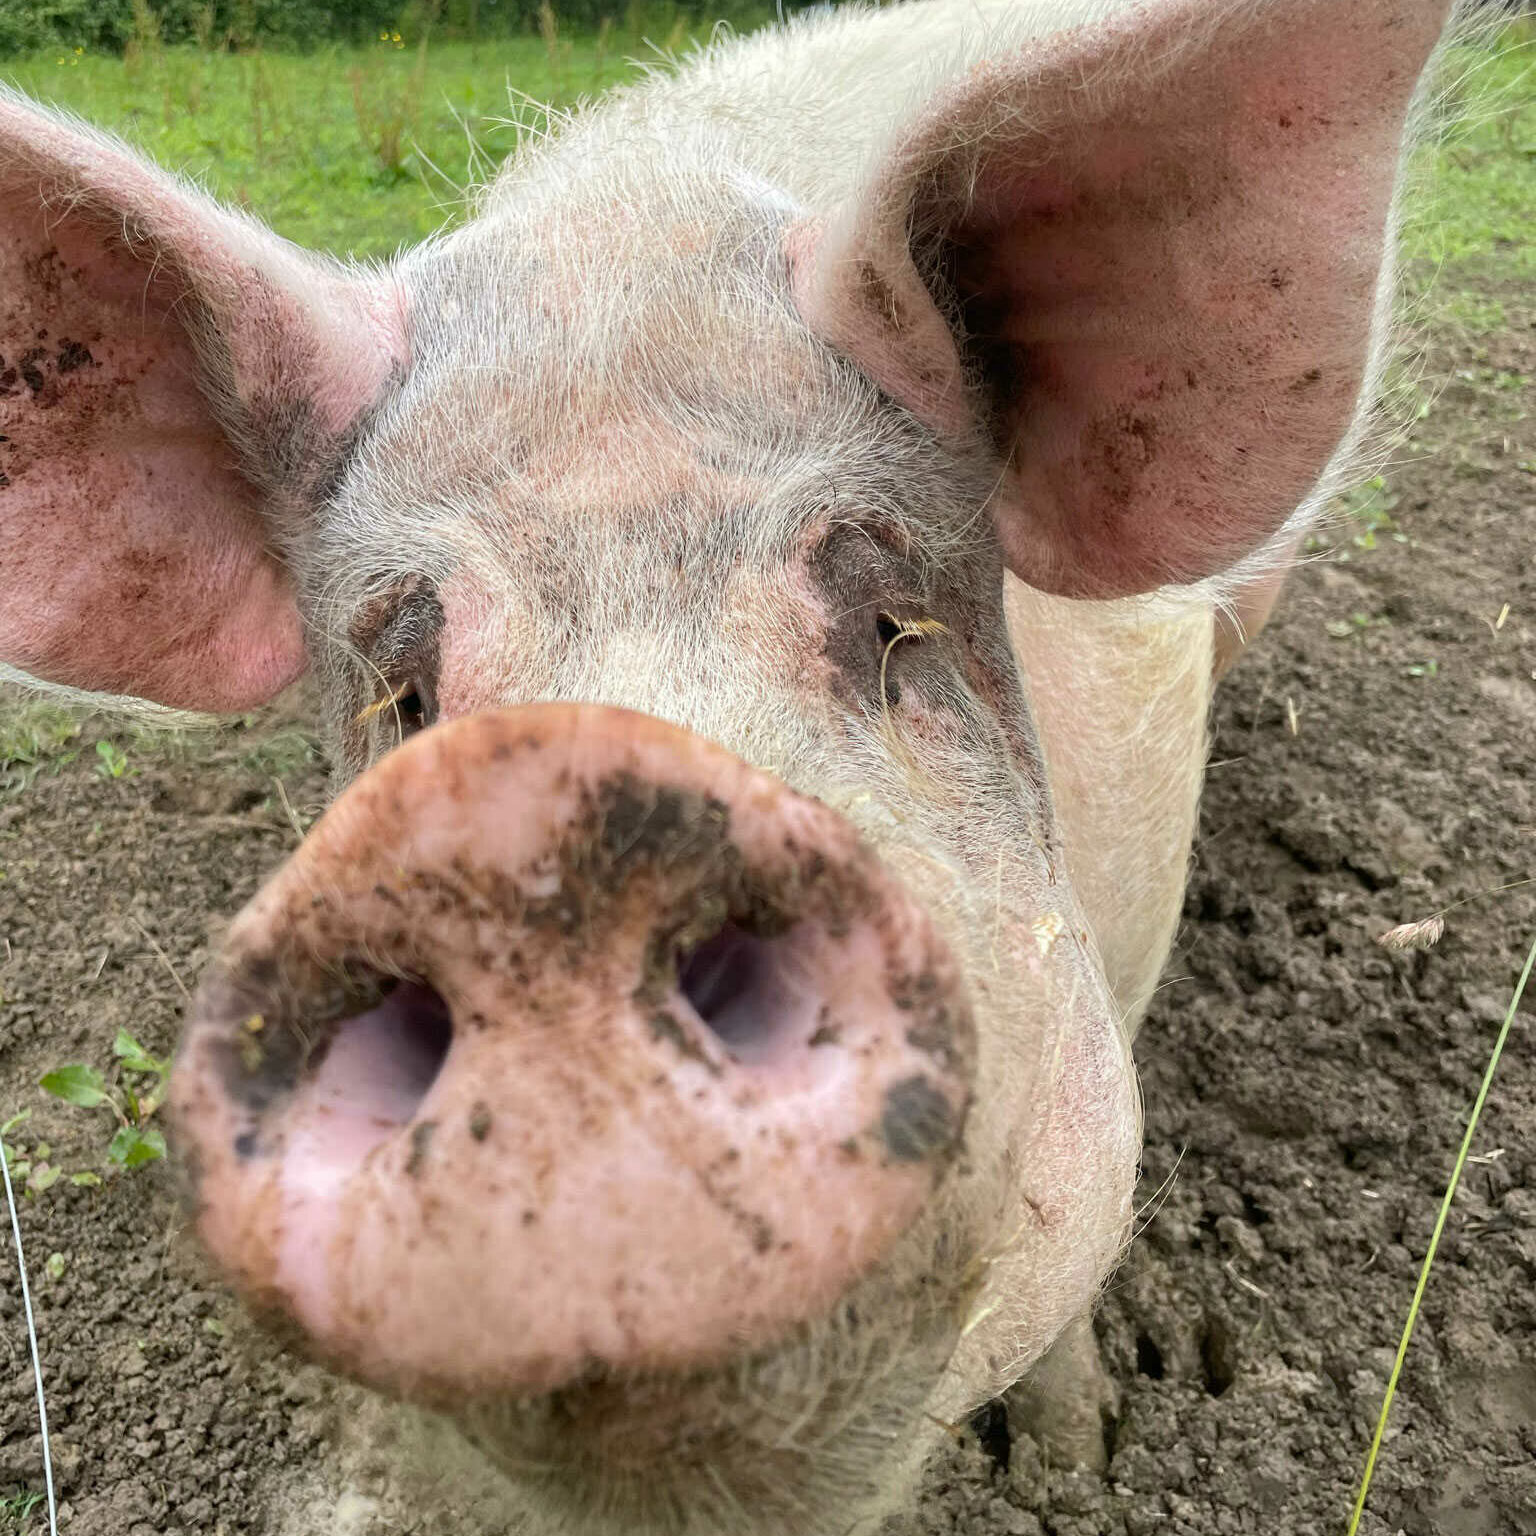 pig with snout in camera lense